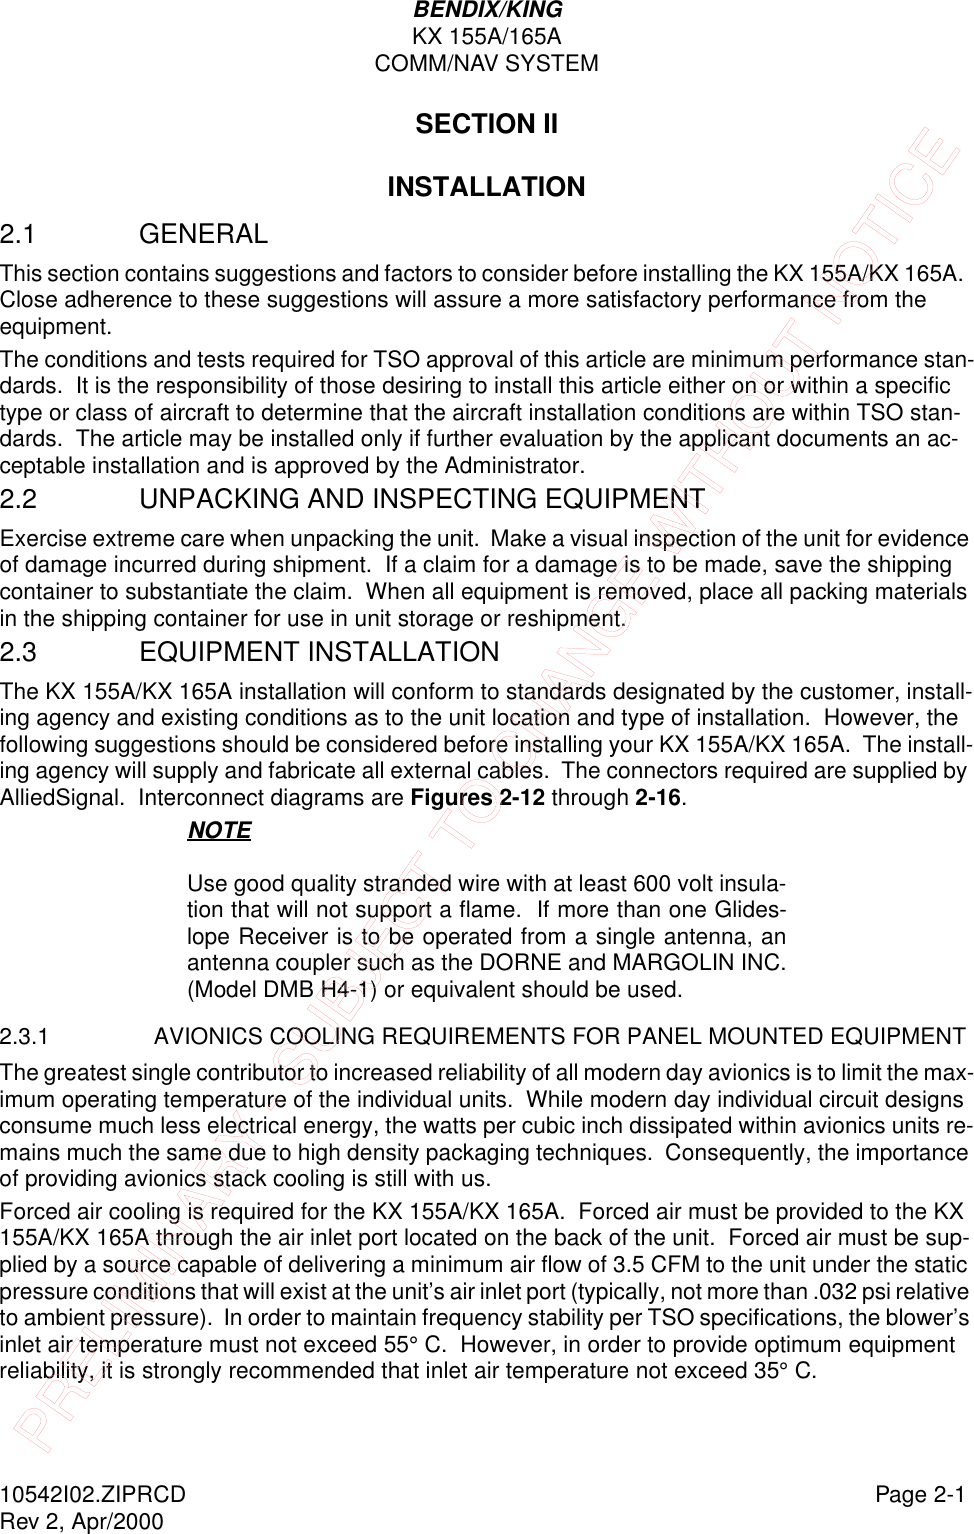 BENDIX/KINGKX 155A/165ACOMM/NAV SYSTEM10542I02.ZIPRCD Page 2-1Rev 2, Apr/2000SECTION IIINSTALLATION2.1 GENERAL This section contains suggestions and factors to consider before installing the KX 155A/KX 165A.  Close adherence to these suggestions will assure a more satisfactory performance from the equipment.The conditions and tests required for TSO approval of this article are minimum performance stan-dards.  It is the responsibility of those desiring to install this article either on or within a specific type or class of aircraft to determine that the aircraft installation conditions are within TSO stan-dards.  The article may be installed only if further evaluation by the applicant documents an ac-ceptable installation and is approved by the Administrator.2.2 UNPACKING AND INSPECTING EQUIPMENT Exercise extreme care when unpacking the unit.  Make a visual inspection of the unit for evidence of damage incurred during shipment.  If a claim for a damage is to be made, save the shipping container to substantiate the claim.  When all equipment is removed, place all packing materials in the shipping container for use in unit storage or reshipment.2.3 EQUIPMENT INSTALLATION The KX 155A/KX 165A installation will conform to standards designated by the customer, install-ing agency and existing conditions as to the unit location and type of installation.  However, the following suggestions should be considered before installing your KX 155A/KX 165A.  The install-ing agency will supply and fabricate all external cables.  The connectors required are supplied by AlliedSignal.  Interconnect diagrams are Figures 2-12 through 2-16.NOTEUse good quality stranded wire with at least 600 volt insula-tion that will not support a flame.  If more than one Glides-lope Receiver is to be operated from a single antenna, anantenna coupler such as the DORNE and MARGOLIN INC.(Model DMB H4-1) or equivalent should be used.2.3.1 AVIONICS COOLING REQUIREMENTS FOR PANEL MOUNTED EQUIPMENT The greatest single contributor to increased reliability of all modern day avionics is to limit the max-imum operating temperature of the individual units.  While modern day individual circuit designs consume much less electrical energy, the watts per cubic inch dissipated within avionics units re-mains much the same due to high density packaging techniques.  Consequently, the importance of providing avionics stack cooling is still with us.Forced air cooling is required for the KX 155A/KX 165A.  Forced air must be provided to the KX 155A/KX 165A through the air inlet port located on the back of the unit.  Forced air must be sup-plied by a source capable of delivering a minimum air flow of 3.5 CFM to the unit under the static pressure conditions that will exist at the unit’s air inlet port (typically, not more than .032 psi relative to ambient pressure).  In order to maintain frequency stability per TSO specifications, the blower’s inlet air temperature must not exceed 55° C.  However, in order to provide optimum equipment reliability, it is strongly recommended that inlet air temperature not exceed 35° C.PRELIMINARY - SUBJECT TO CHANGE WITHOUT NOTICE